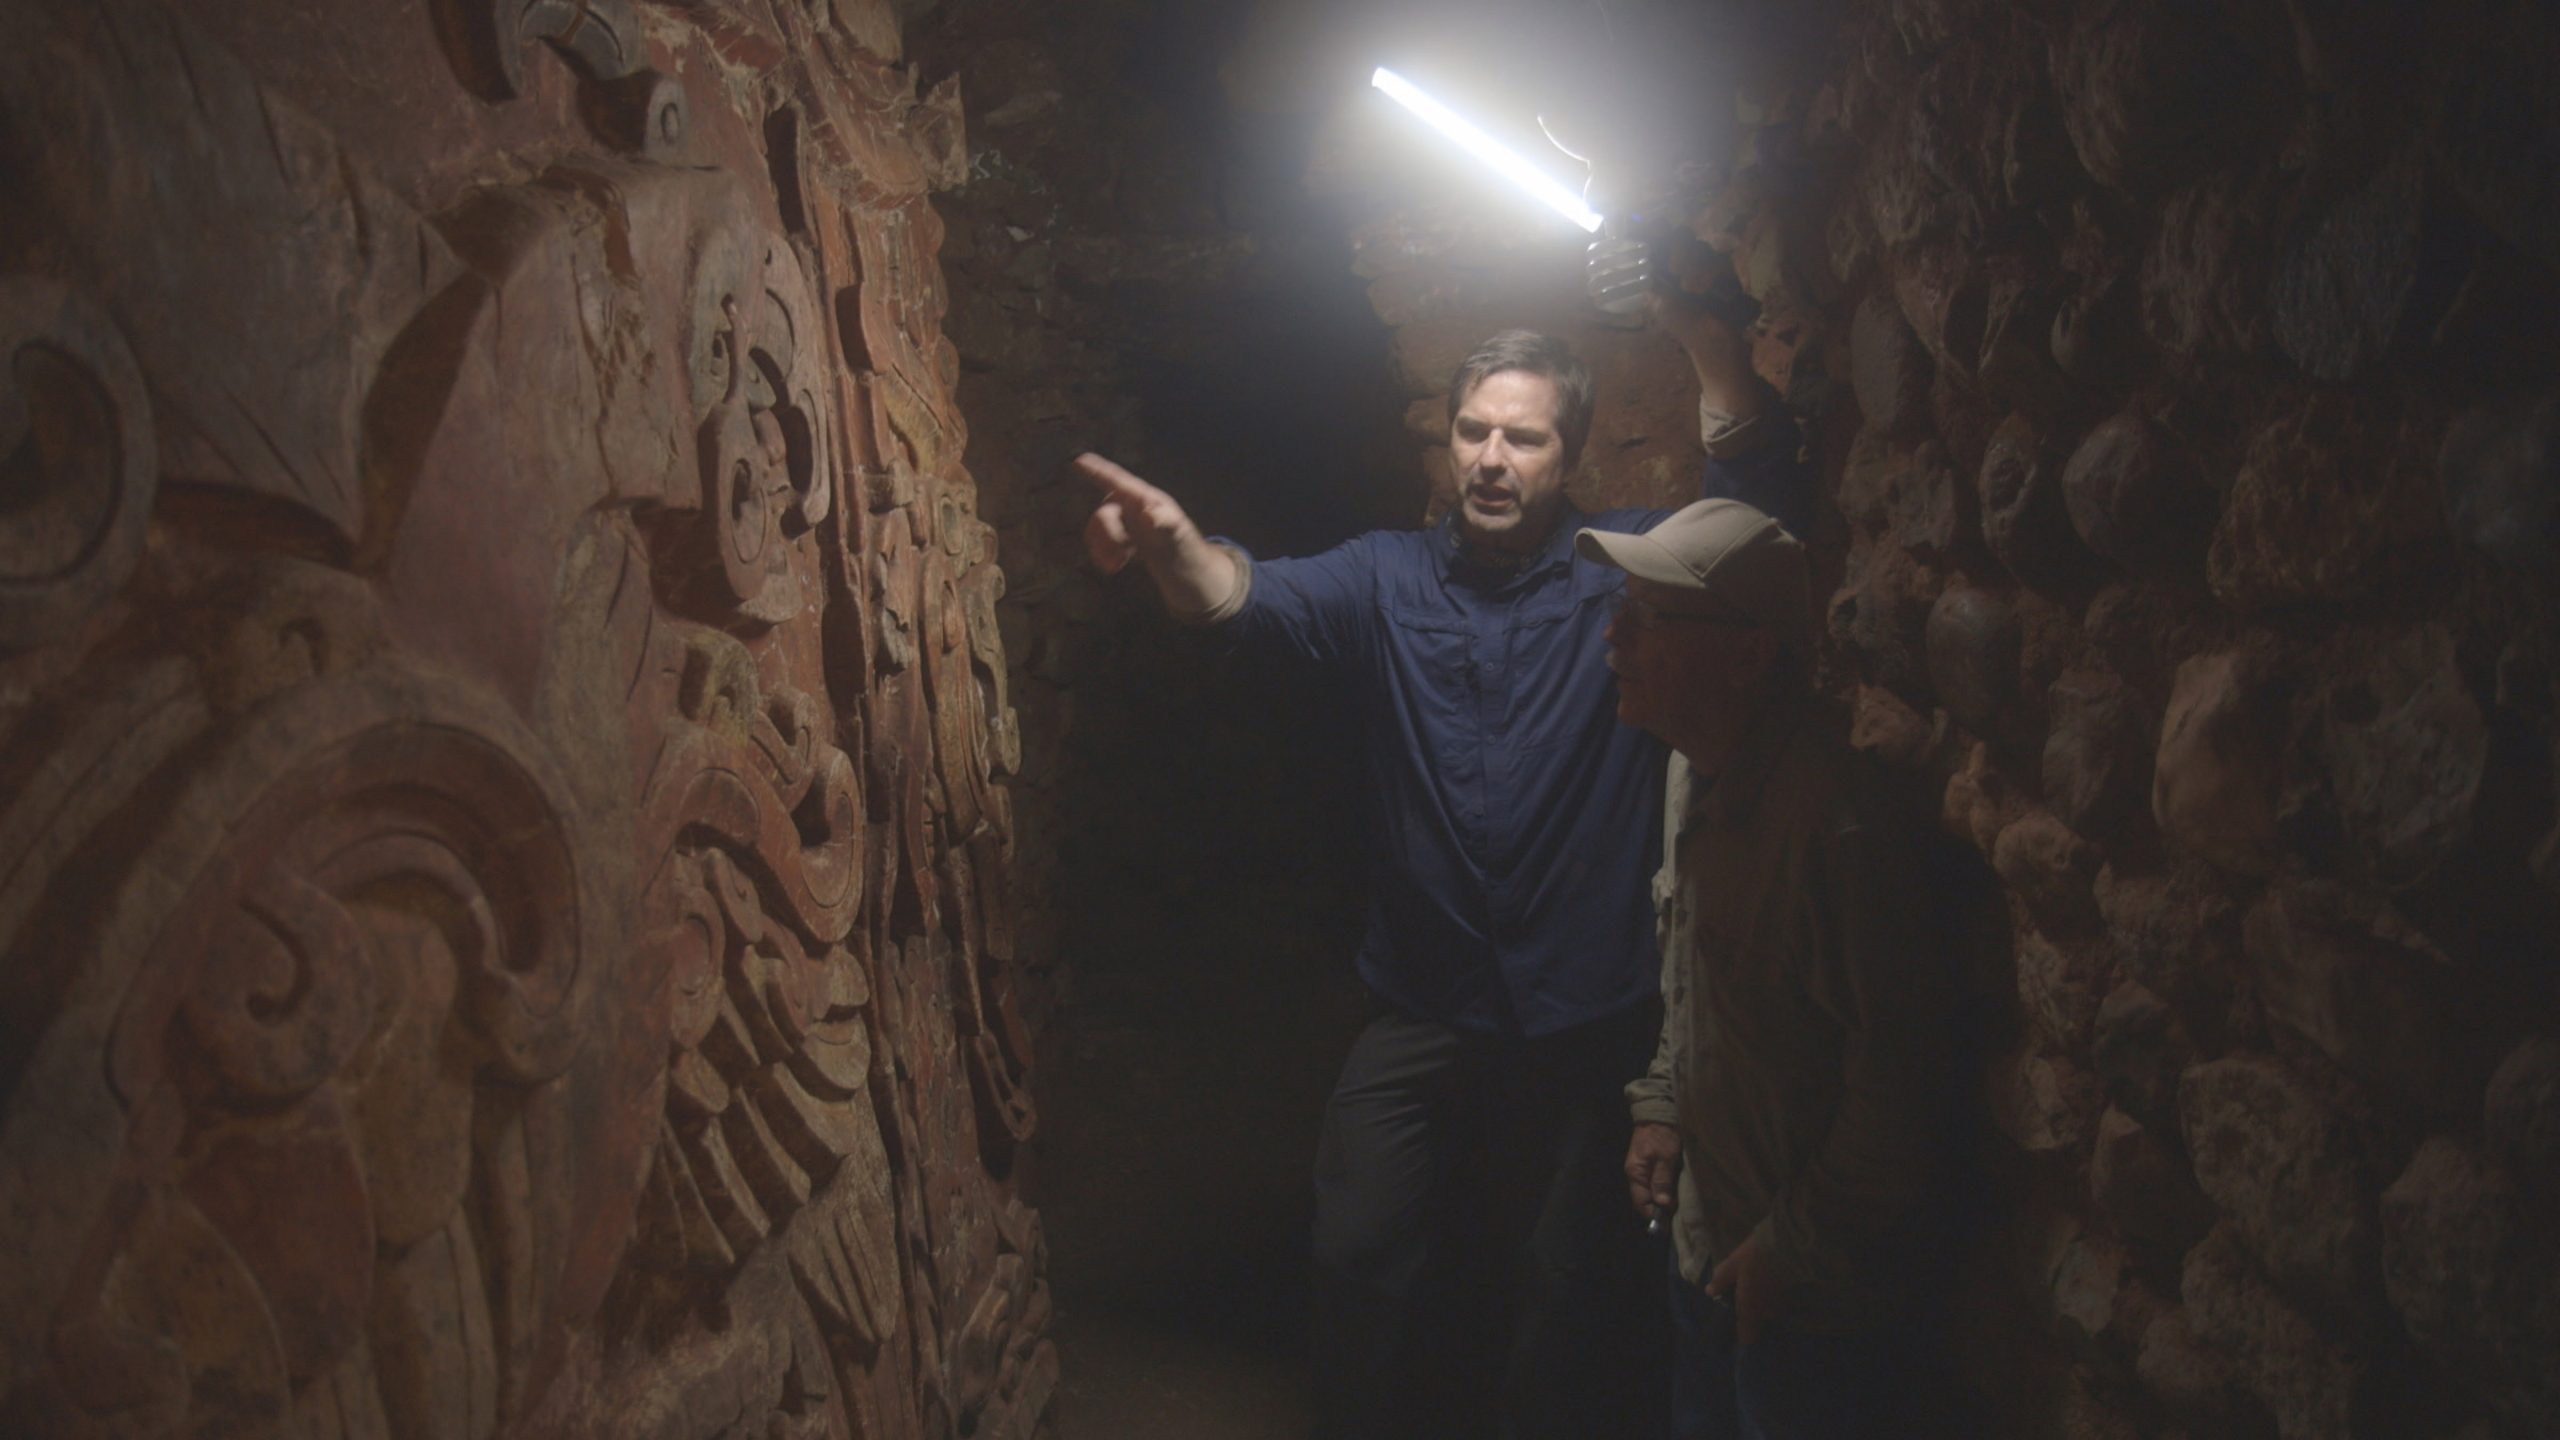 [News] Travel Channel's New Series BURIED WORLDS WITH DON WILDMAN Uncovers the World's Dark History